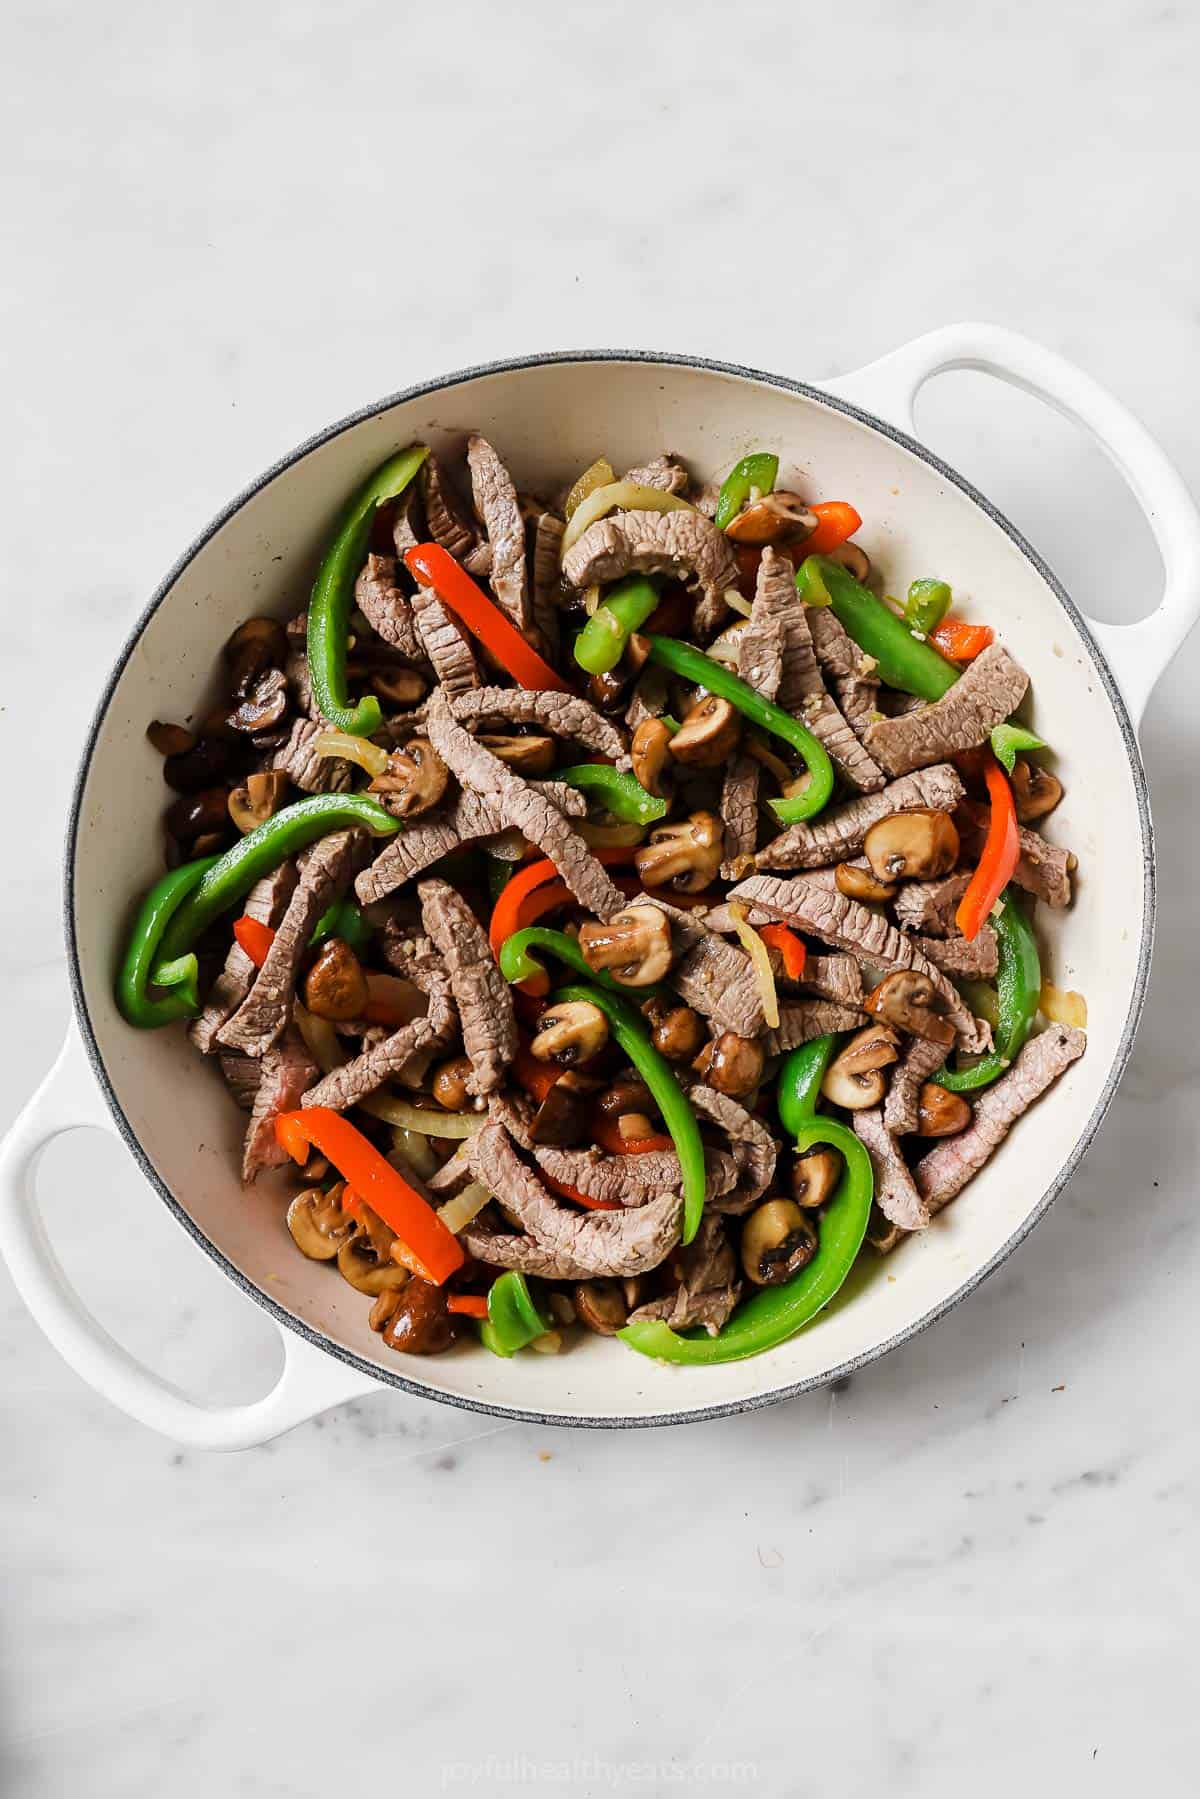 Combining the peppers with the steak and mushrooms. 